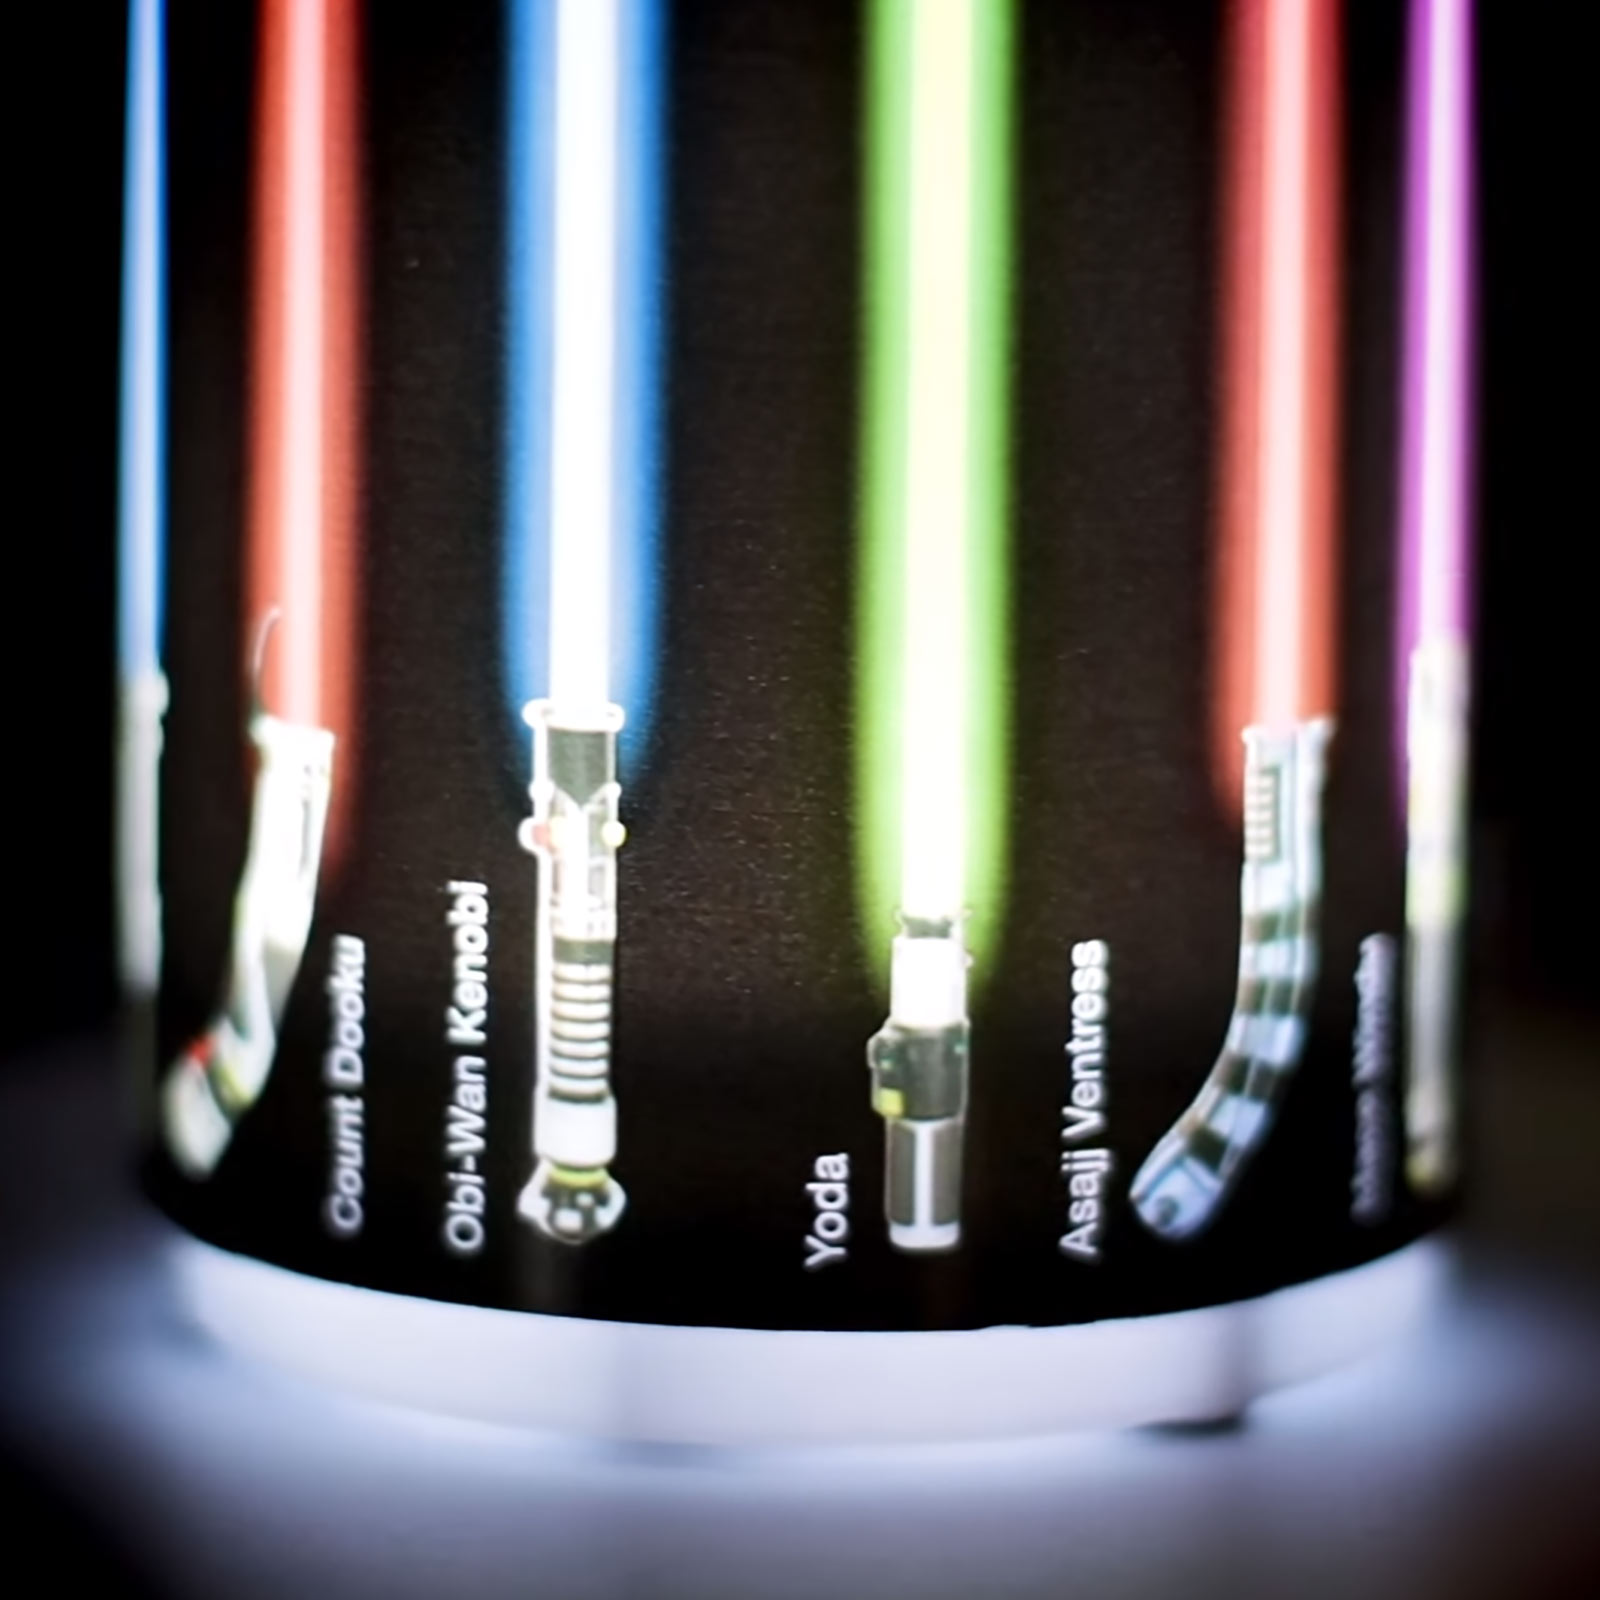 Star Wars - Mini Lightsaber Table Lamp with Sound